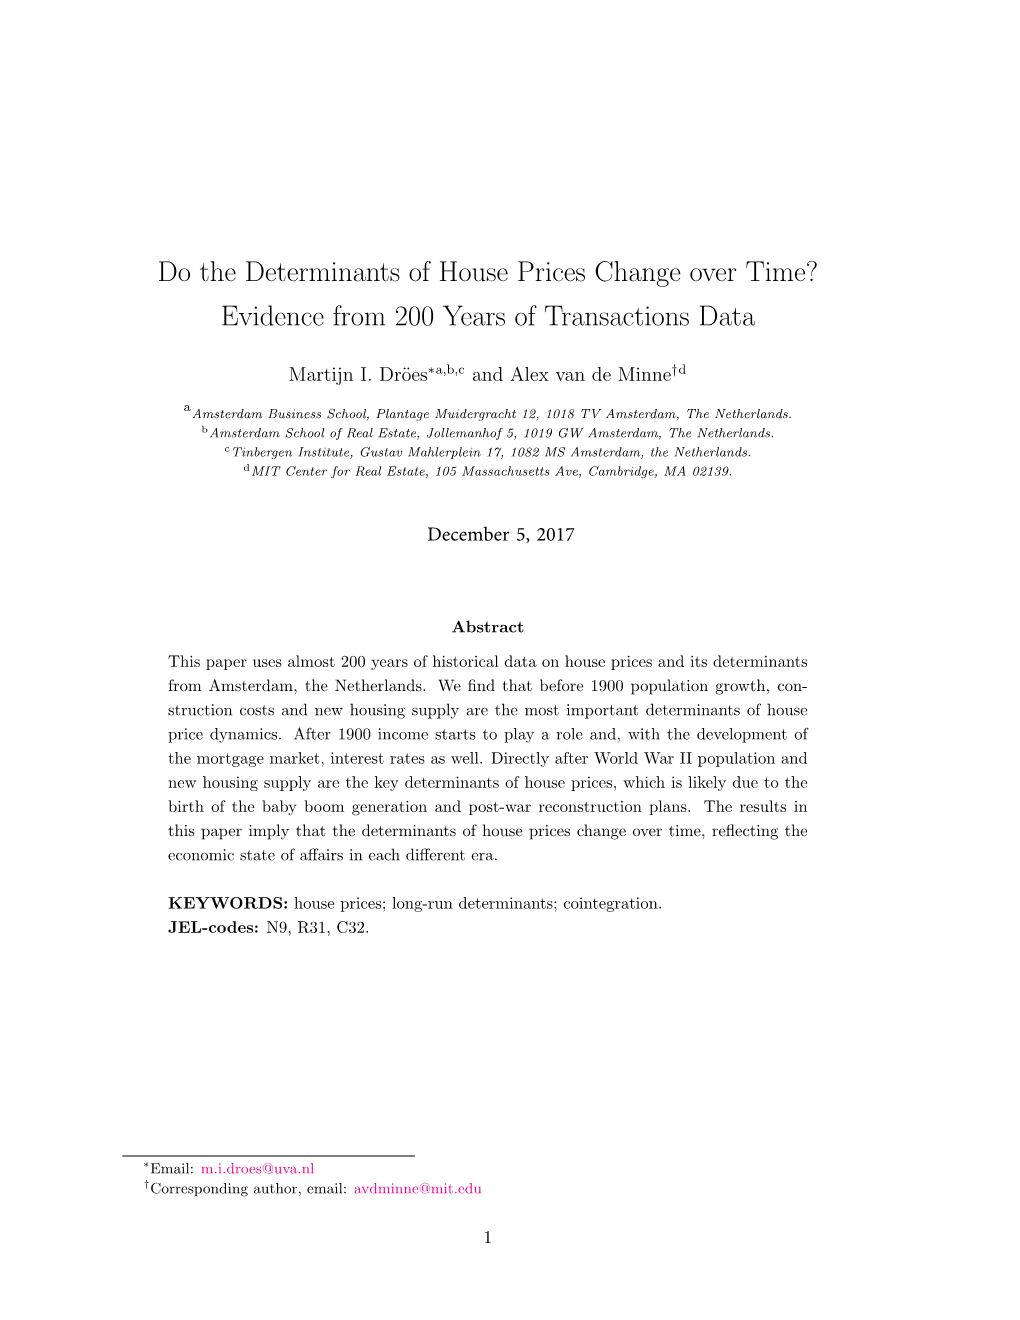 Do the Determinants of House Prices Change Over Time? Evidence from 200 Years of Transactions Data